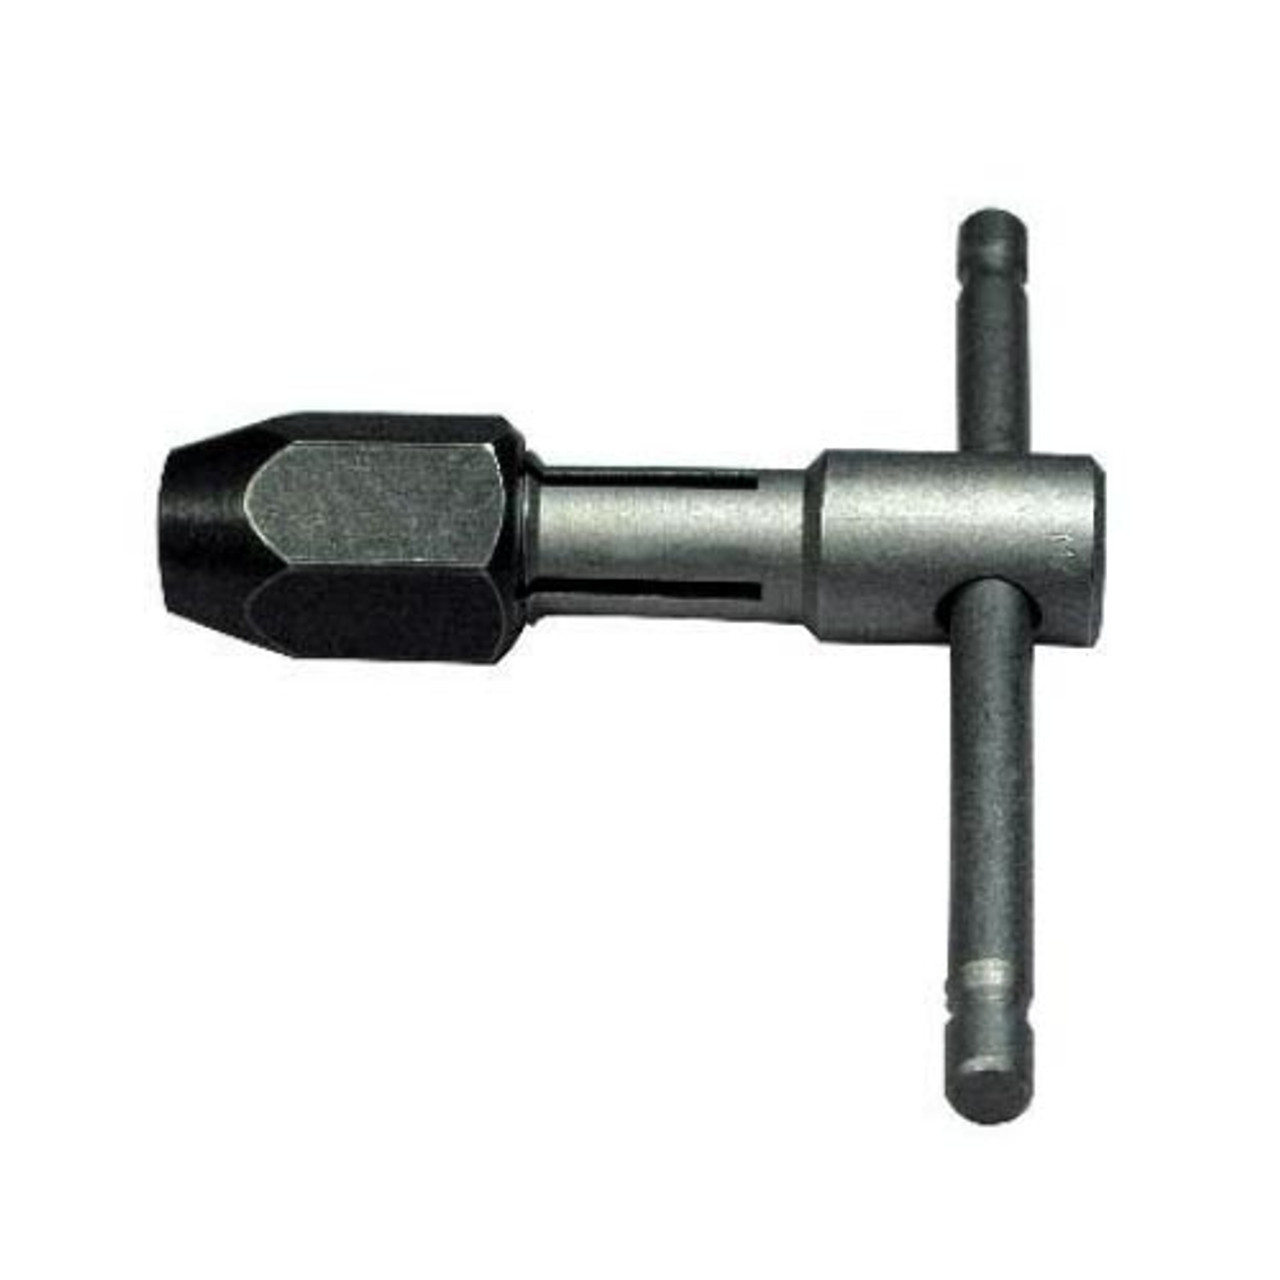 Norseman 50307 - Type 727 T-Handle Tap Wrench